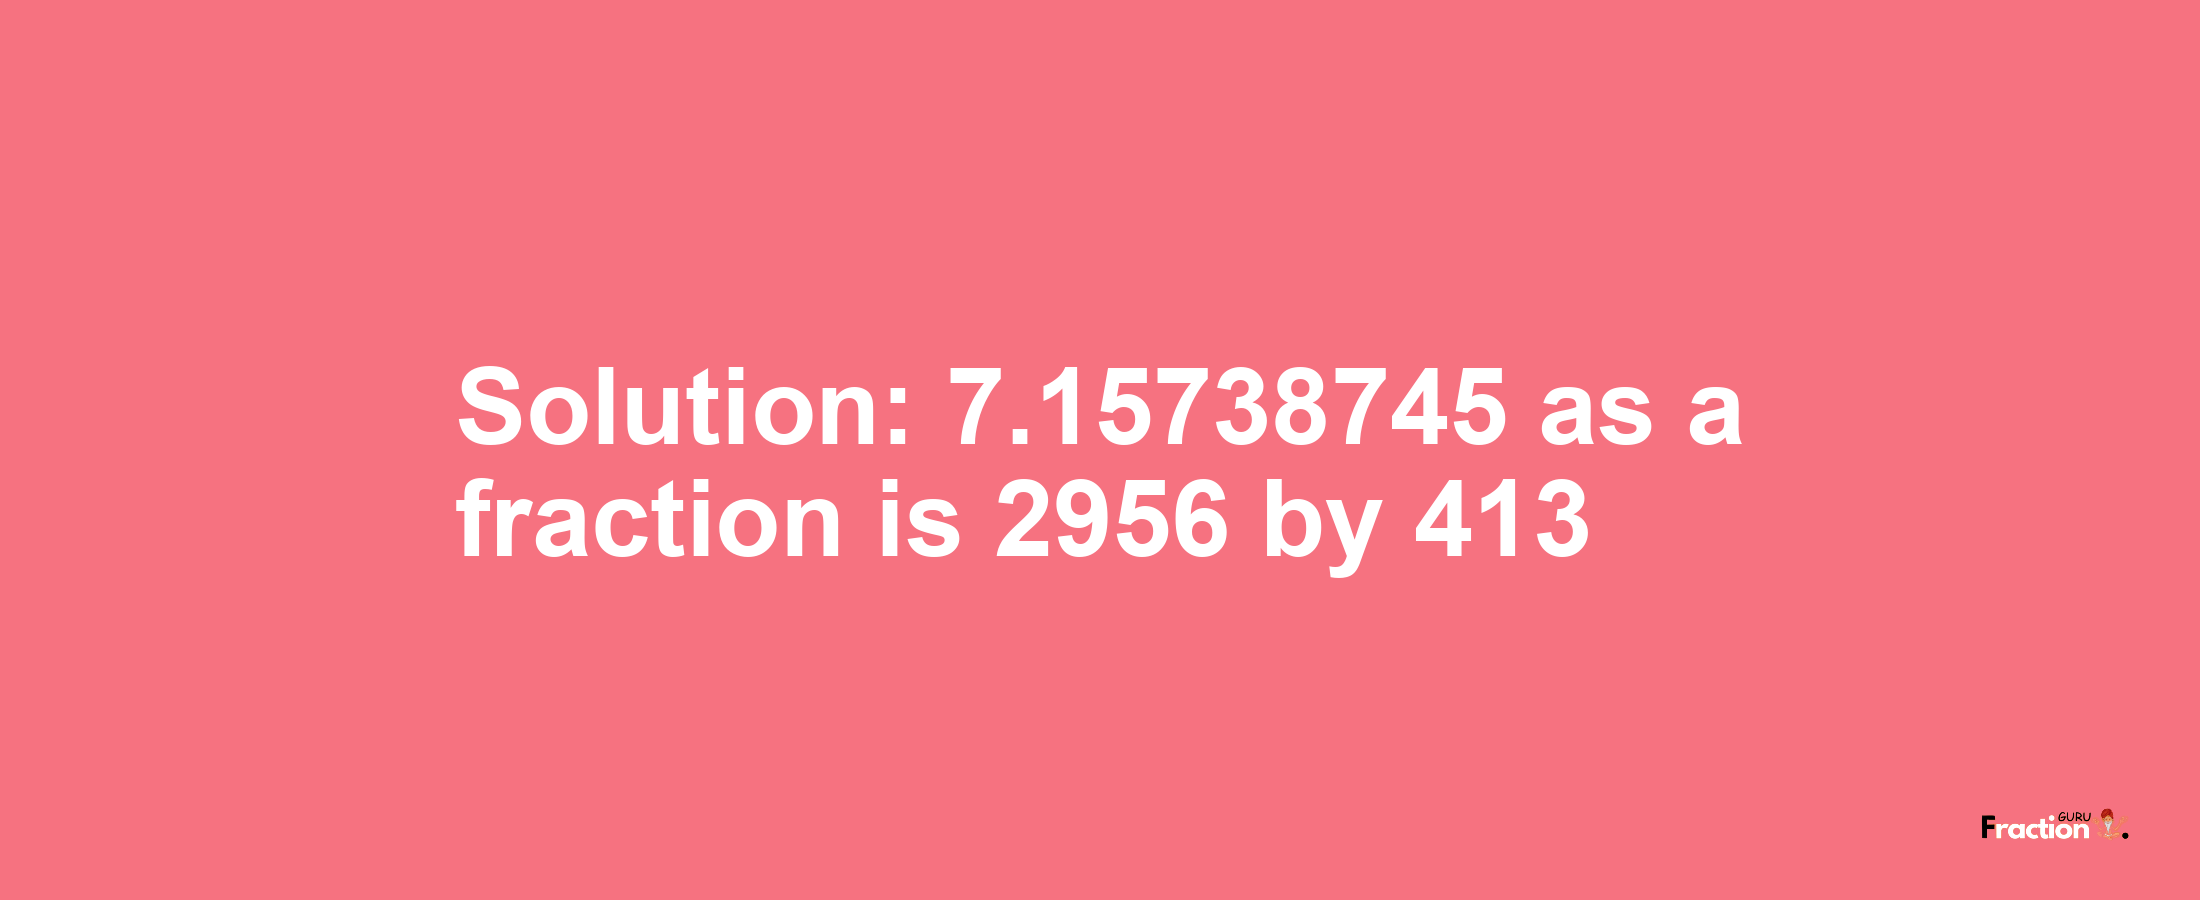 Solution:7.15738745 as a fraction is 2956/413